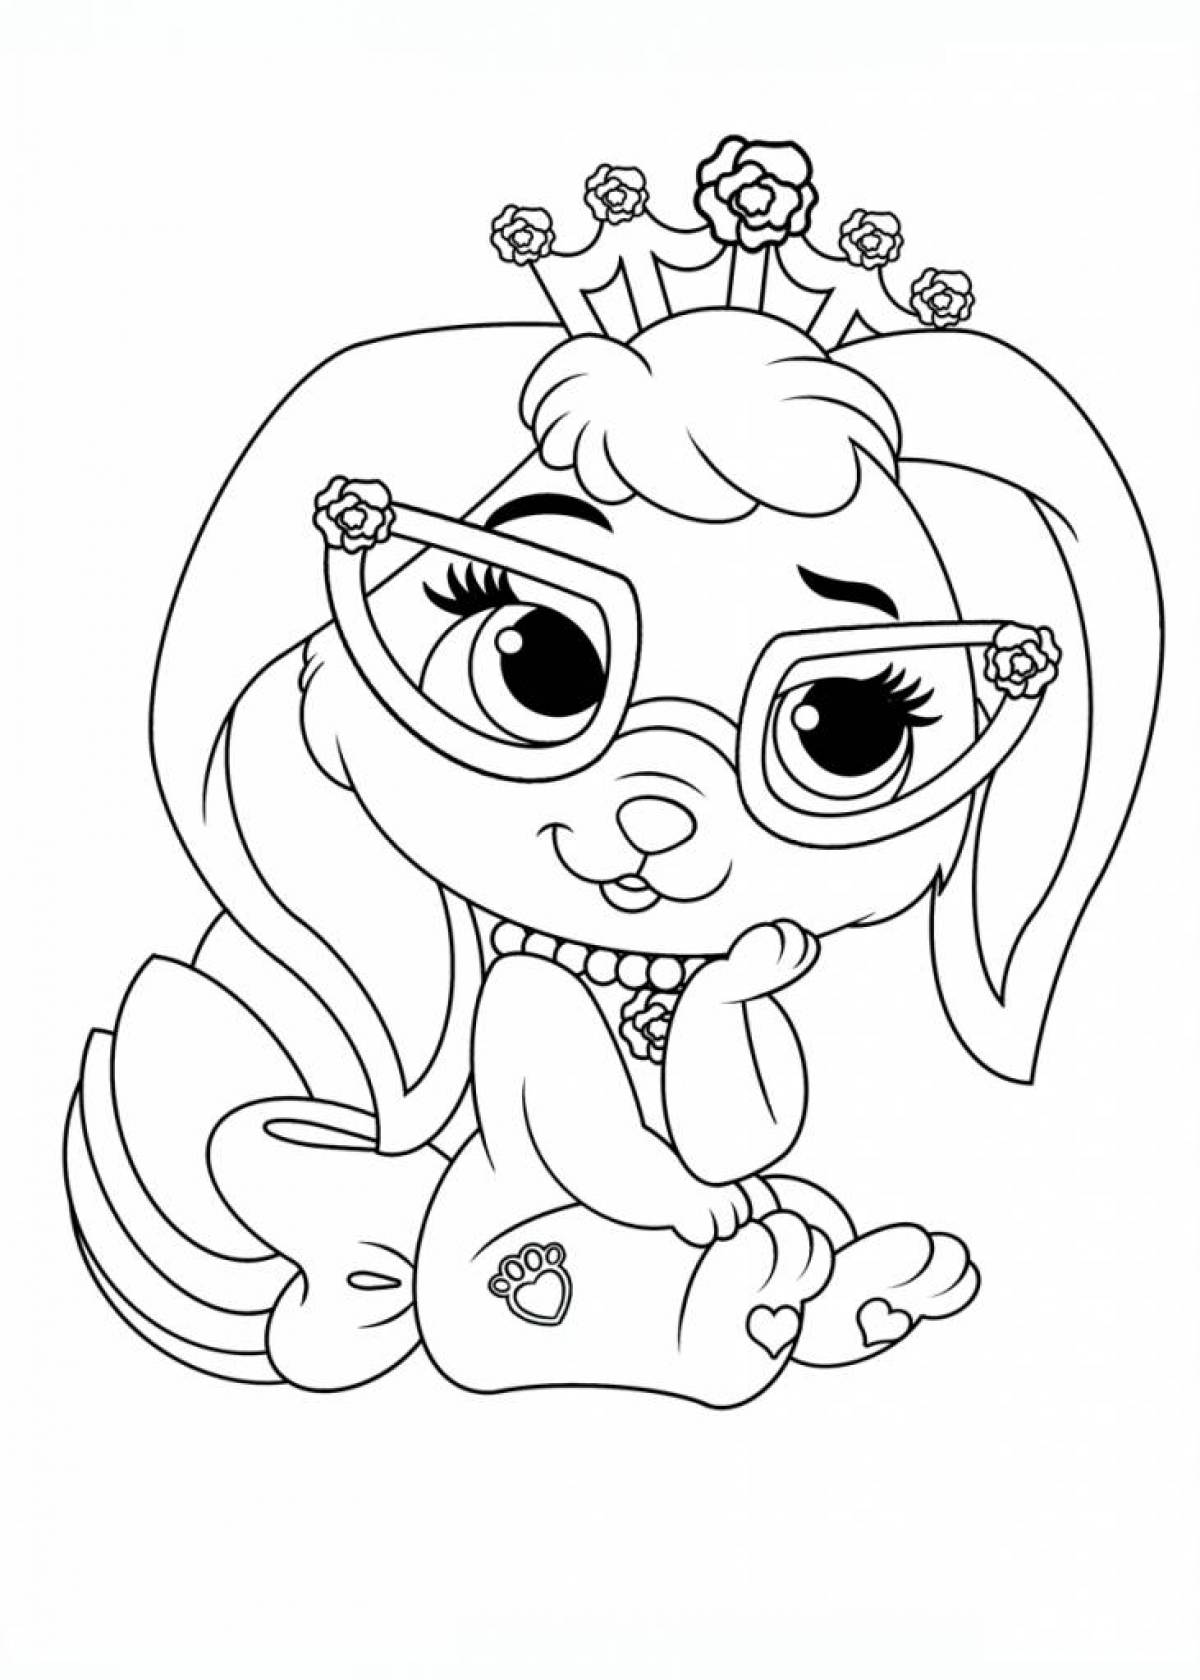 Dazzling VIP Pets Coloring Page